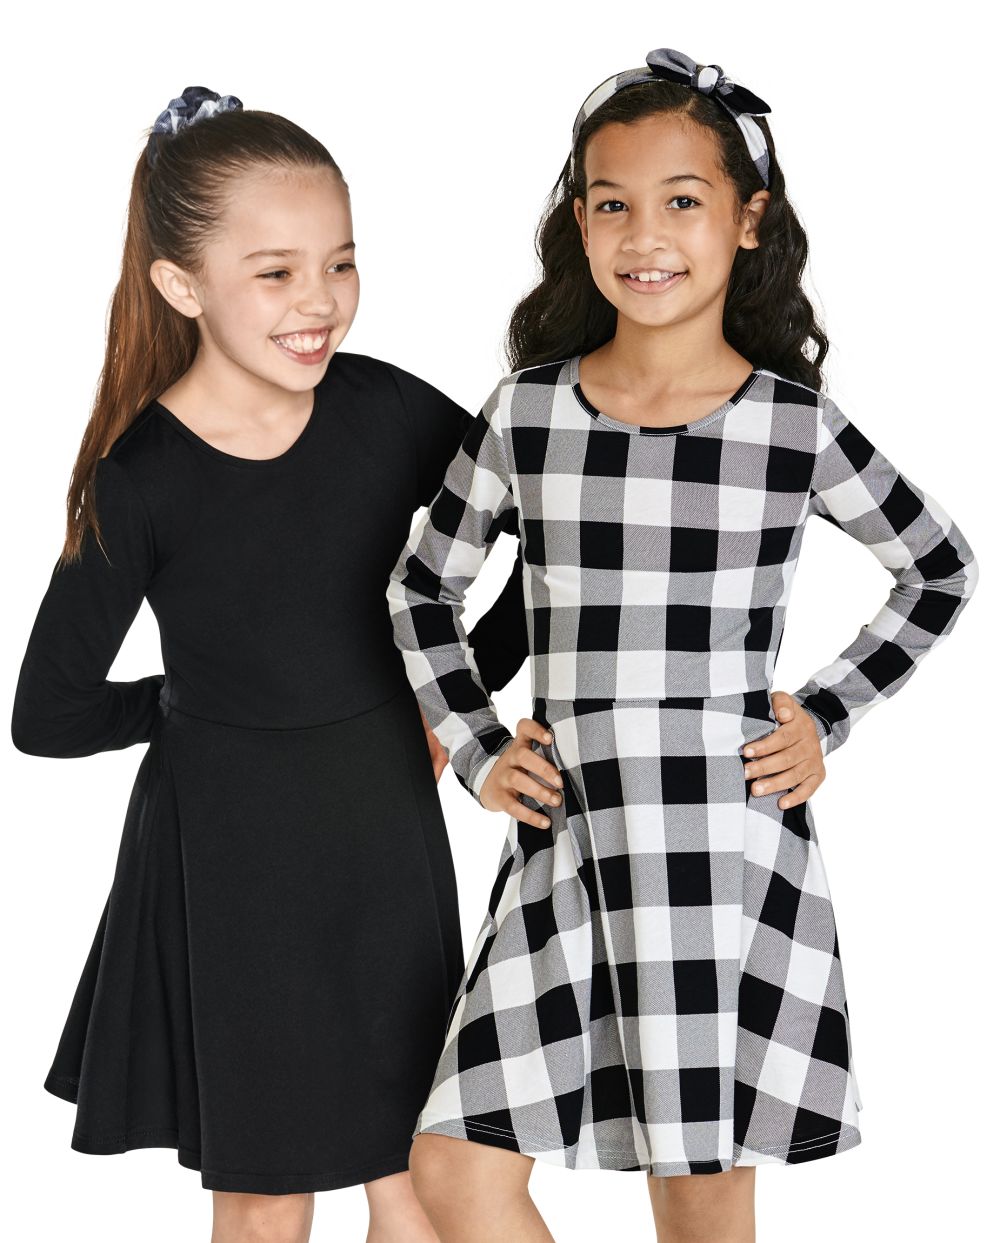 Girls Plaid Print Above the Knee Skater Dress by The Children Place